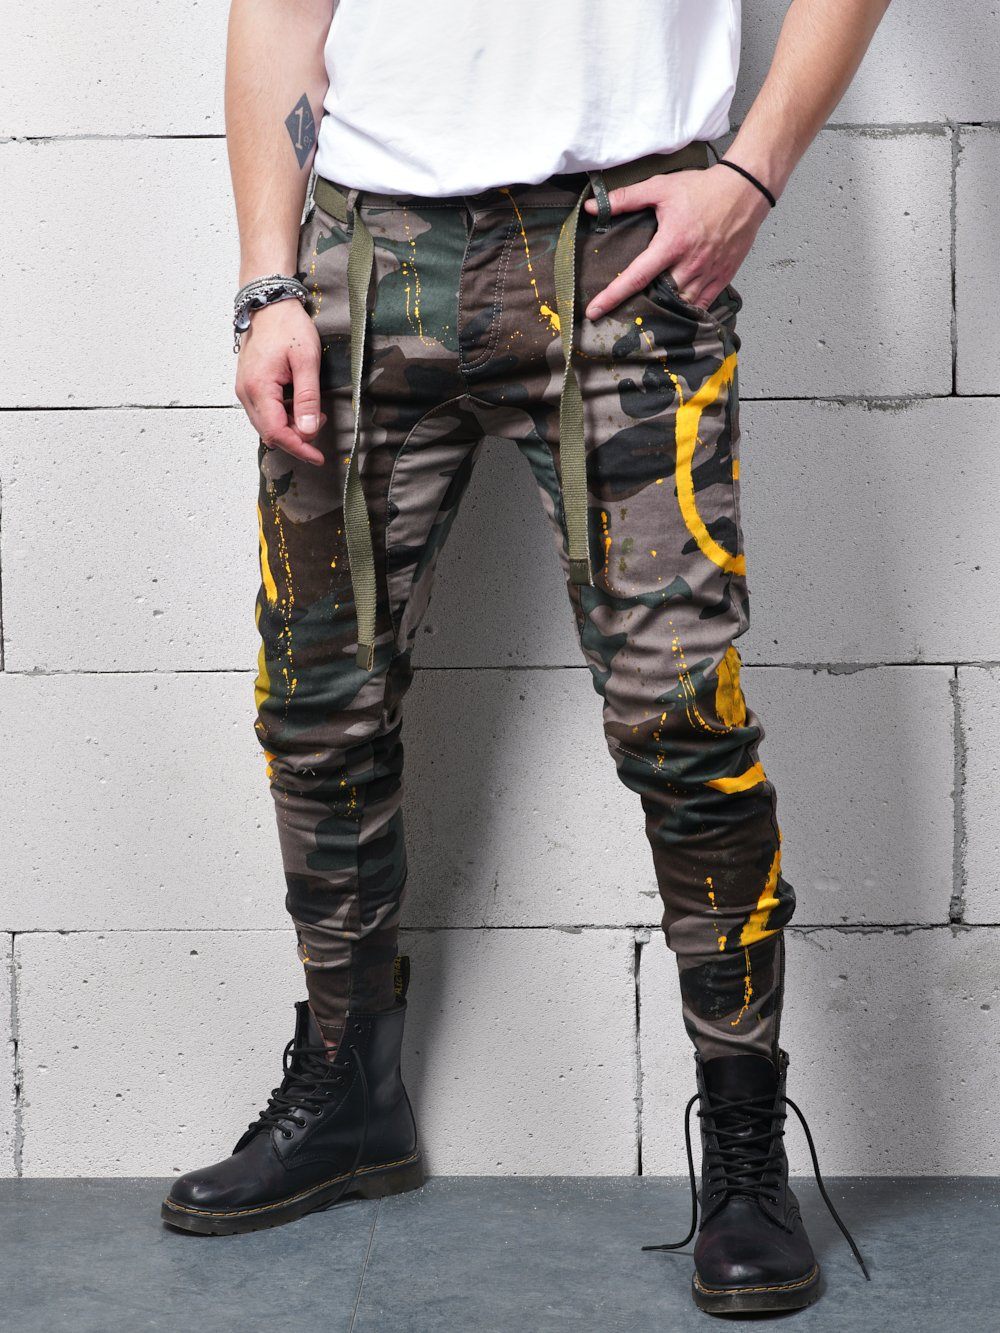 A man in camouflage pants wearing KONGOS stands against a wall.